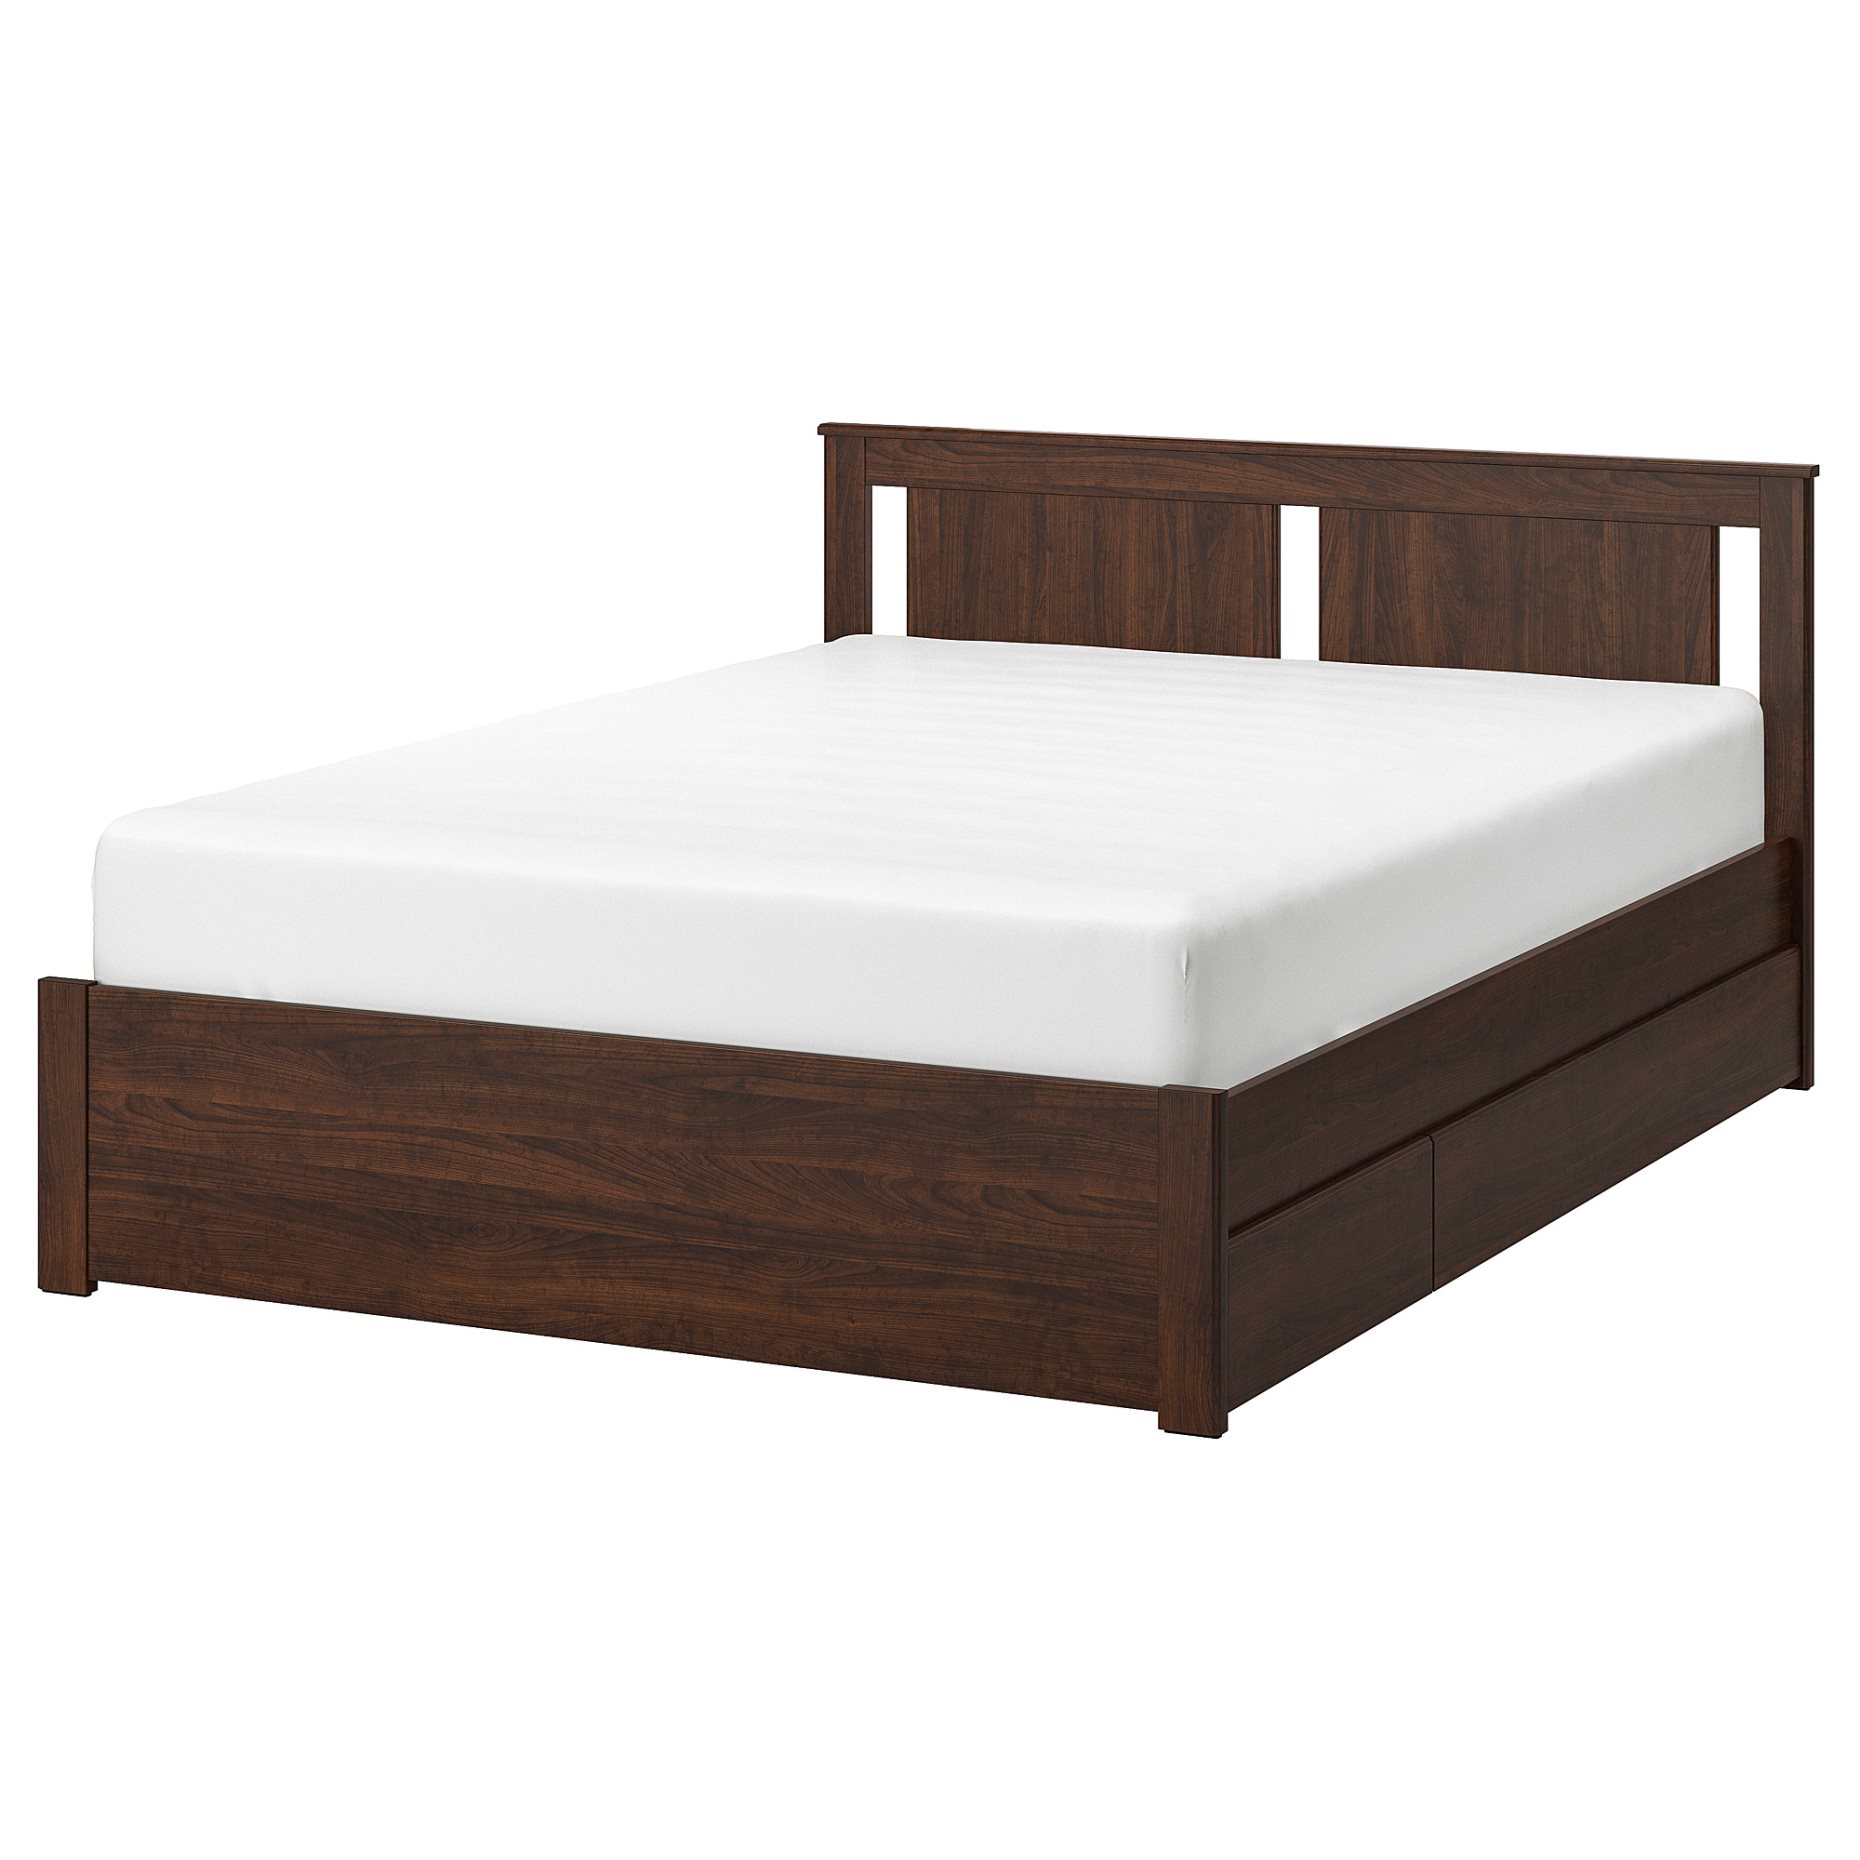 SONGESAND, bed frame with 4 storage boxes, 140X200 cm, 292.411.55